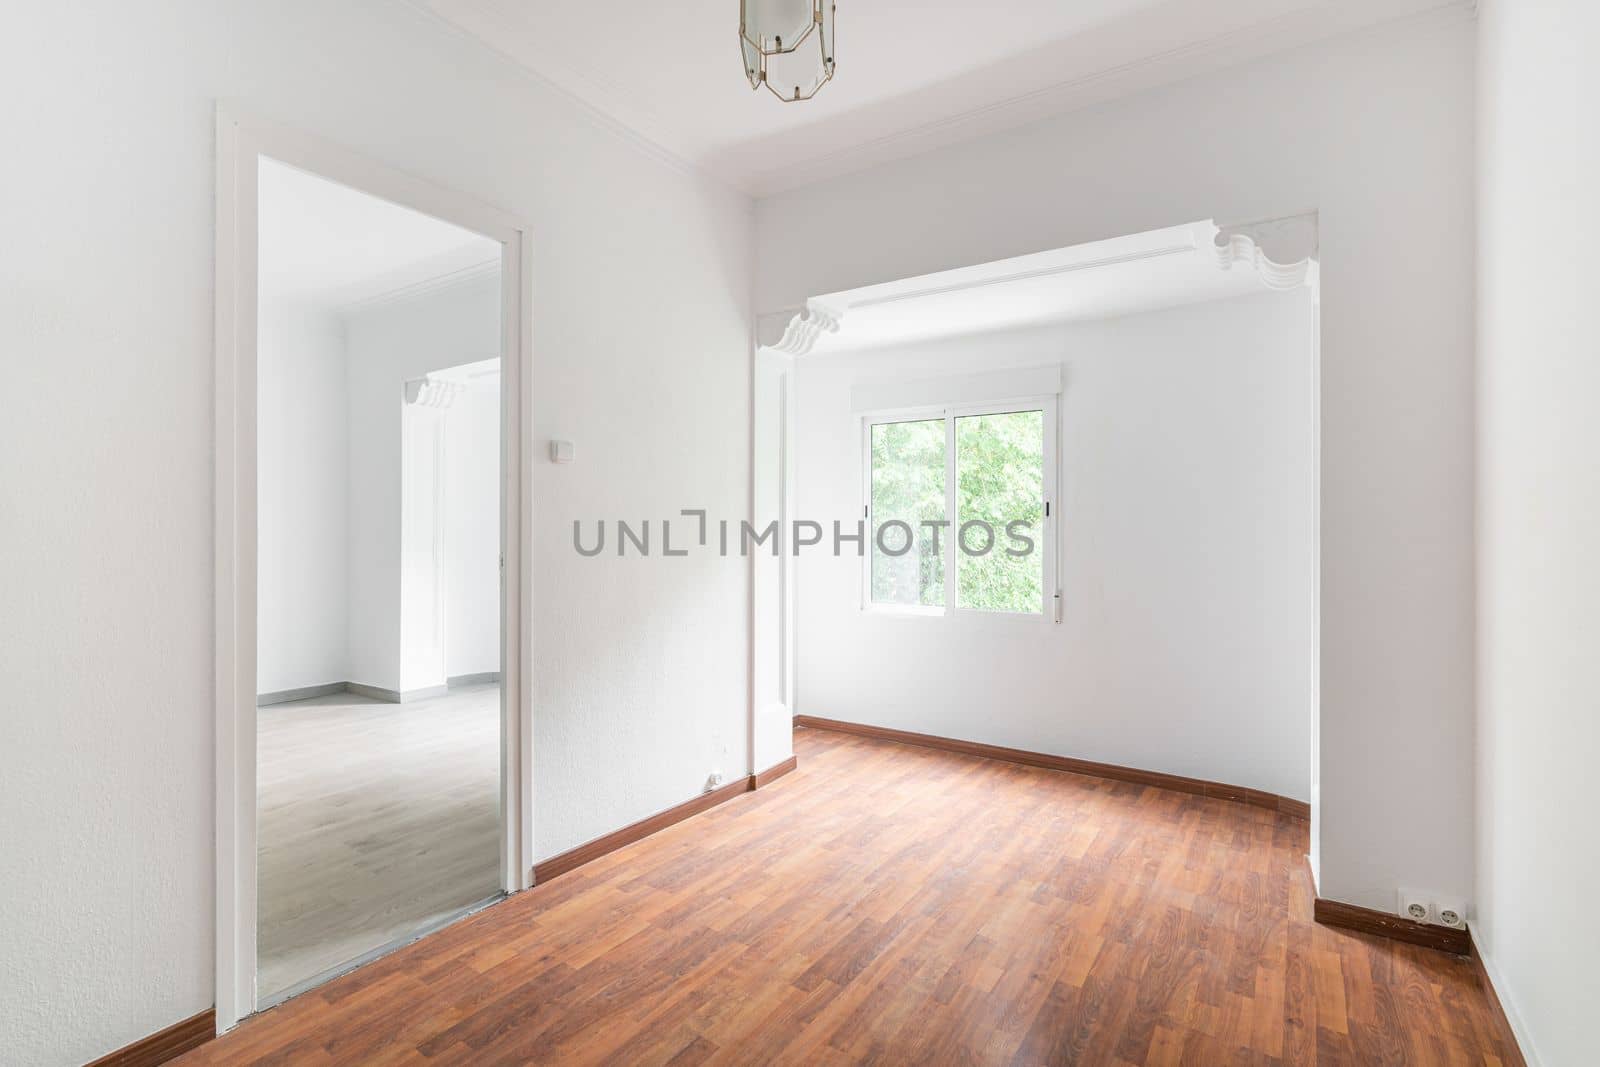 Bright, spacious empty white apartment with curly arch windows and luxury chandelier with wooden floors in dark and light shades. Concept of moving to new modern apartment.